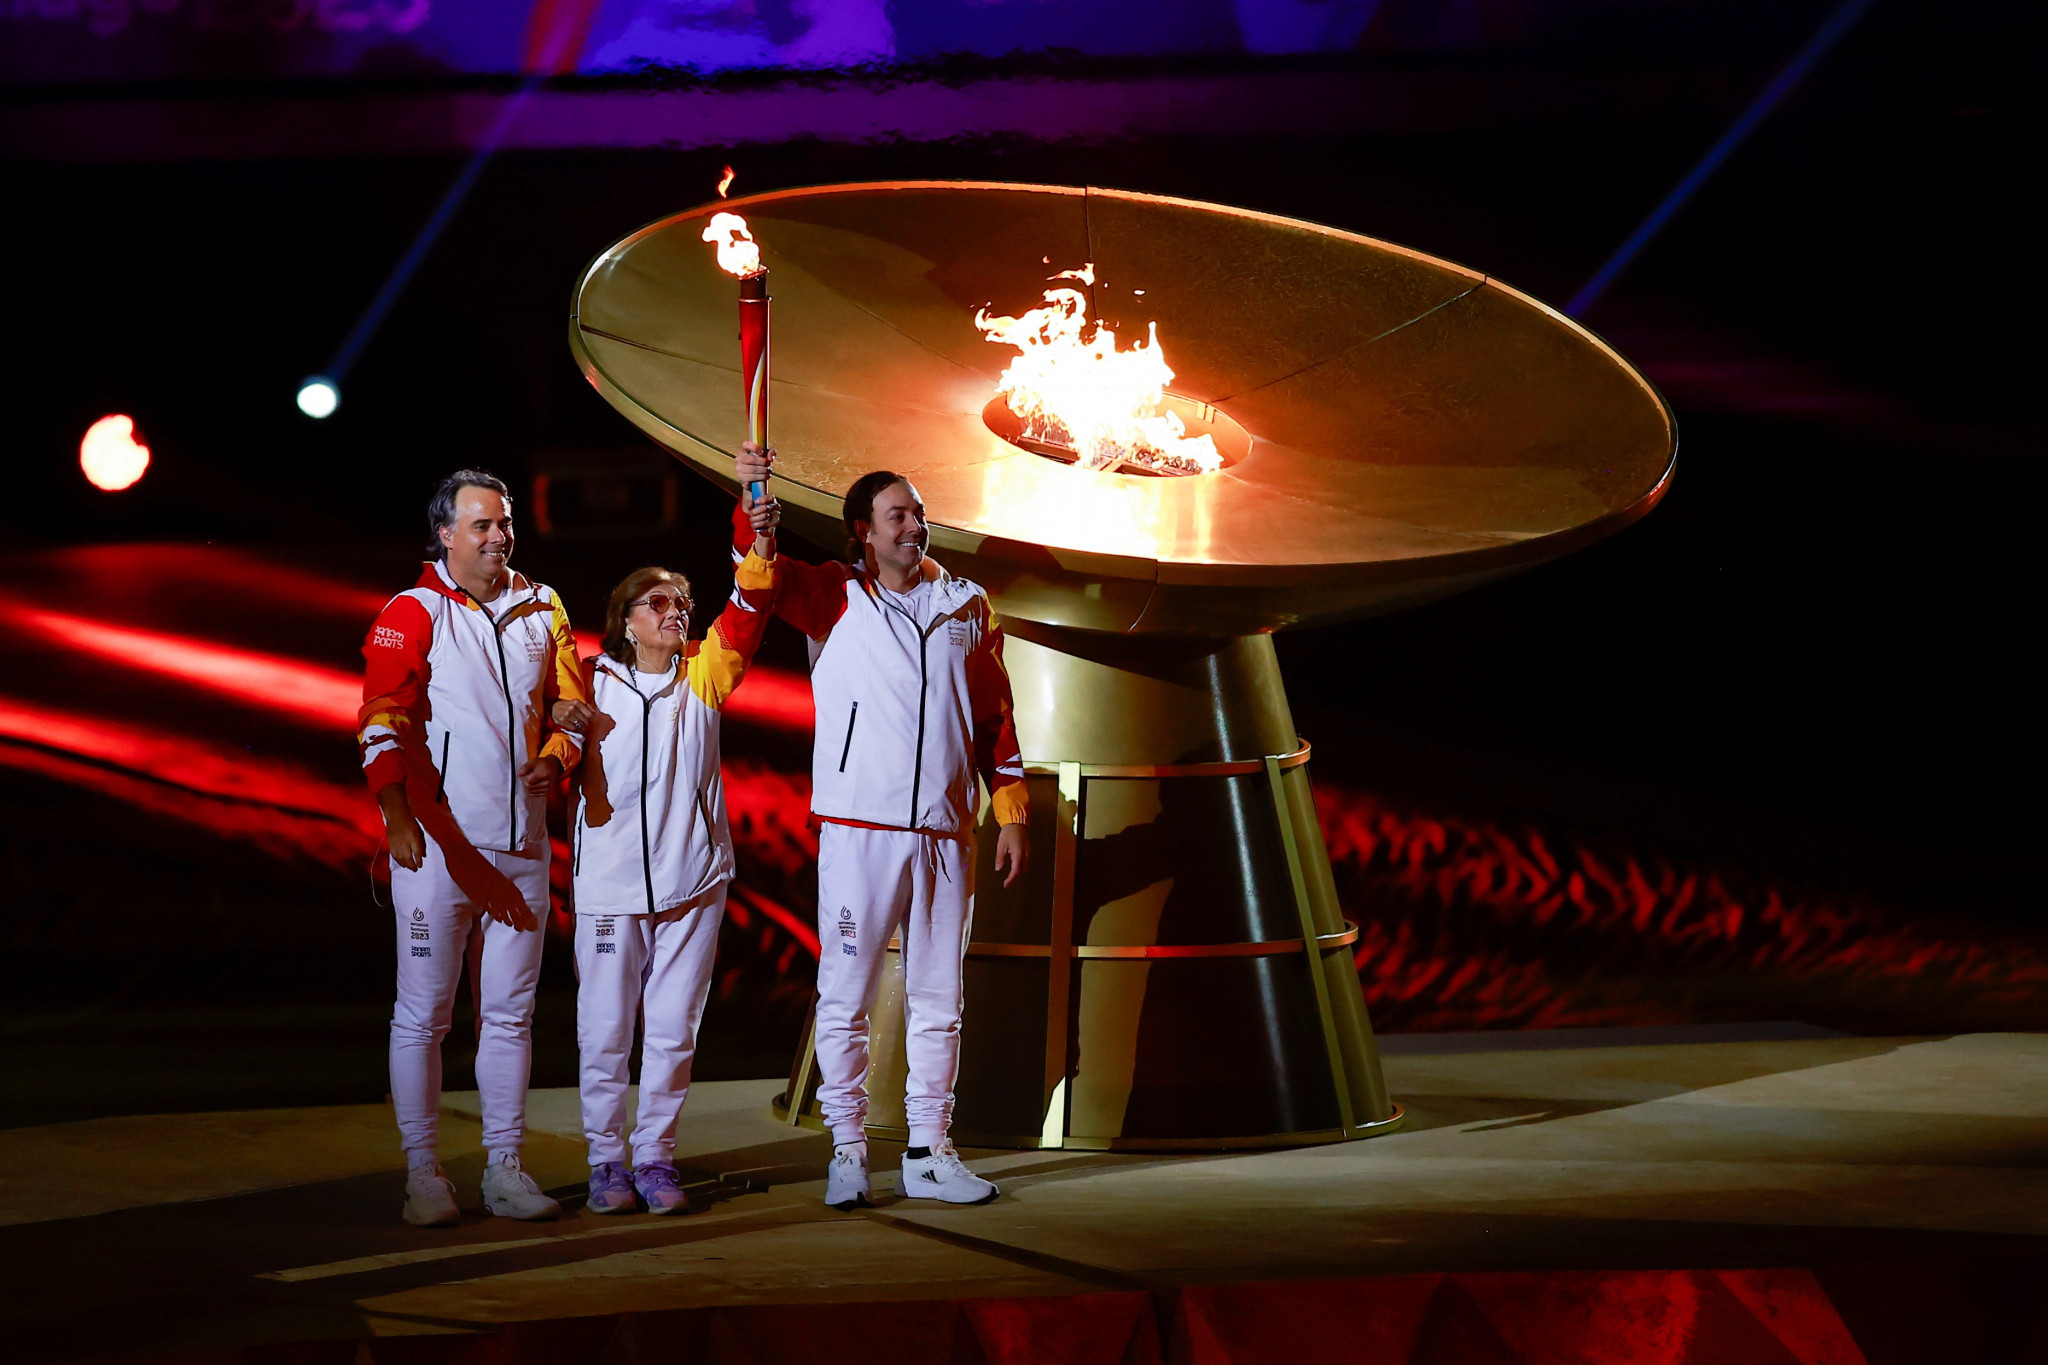 Lucy Lopez, centre, winner of the women's high jump silver medal at the inaugural Pan American Games at Buenos Aires in 1951, walked with Chile's first Olympic gold medallists, tennis stars Nicolas Massu, right, and Fernando González, left, to light the Cauldron ©Santiago 2023